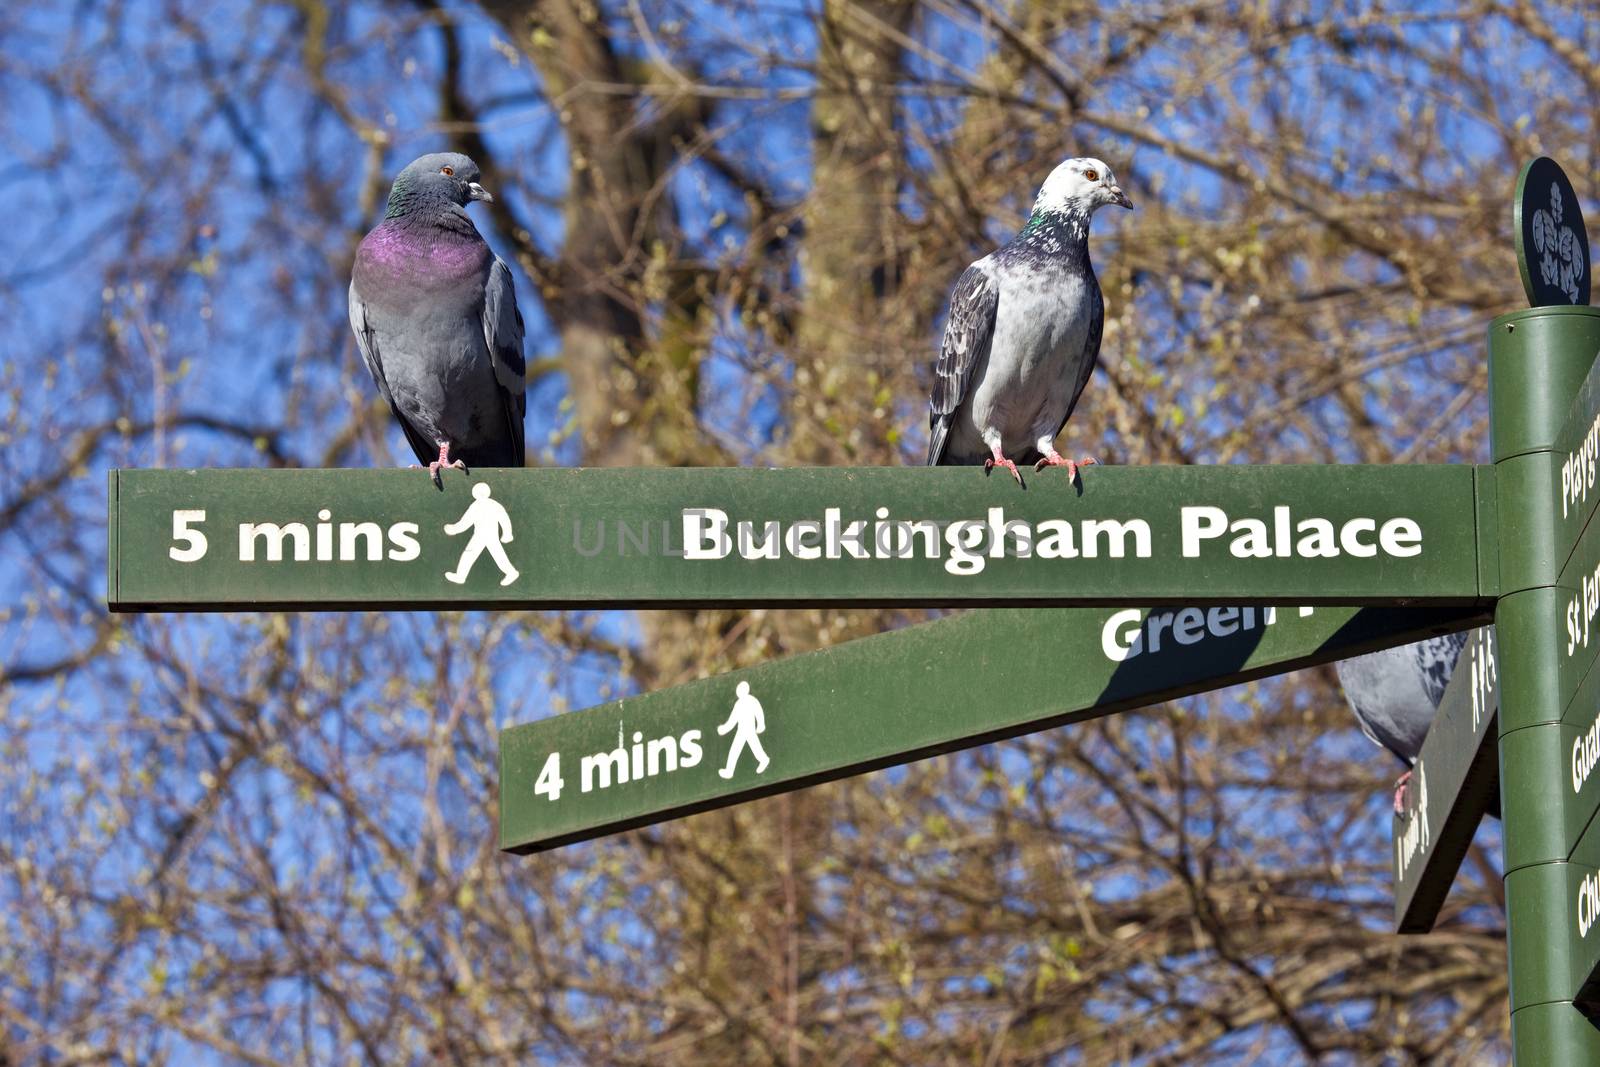 Some Pigeons on pedestrian signposts in London's St. James's Park.